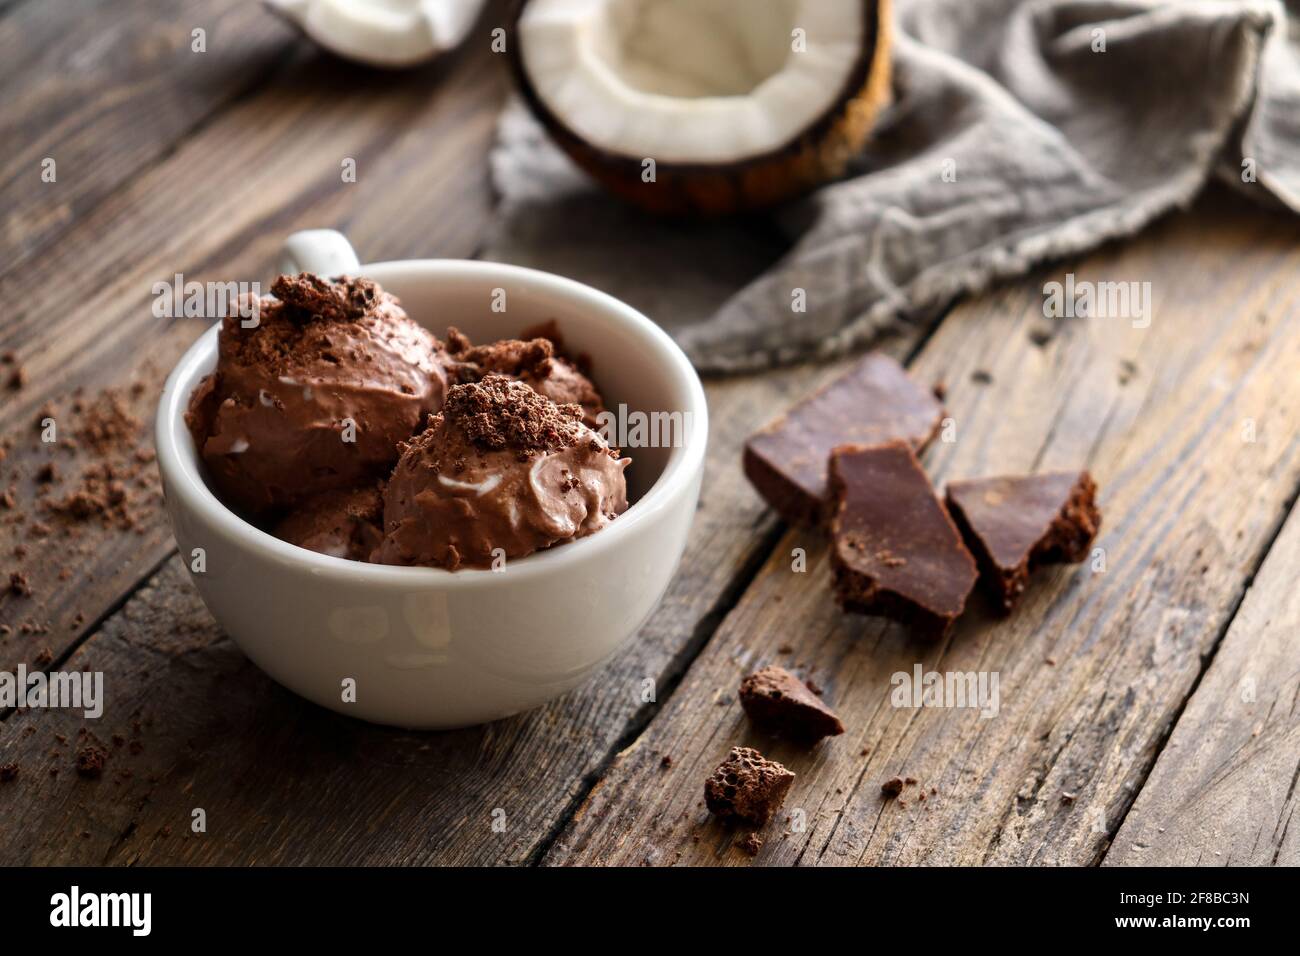 Chocolate coconut vegan ice cream in a white cup. Ice cream balls with chocolate. Wooden background, copy space. Stock Photo